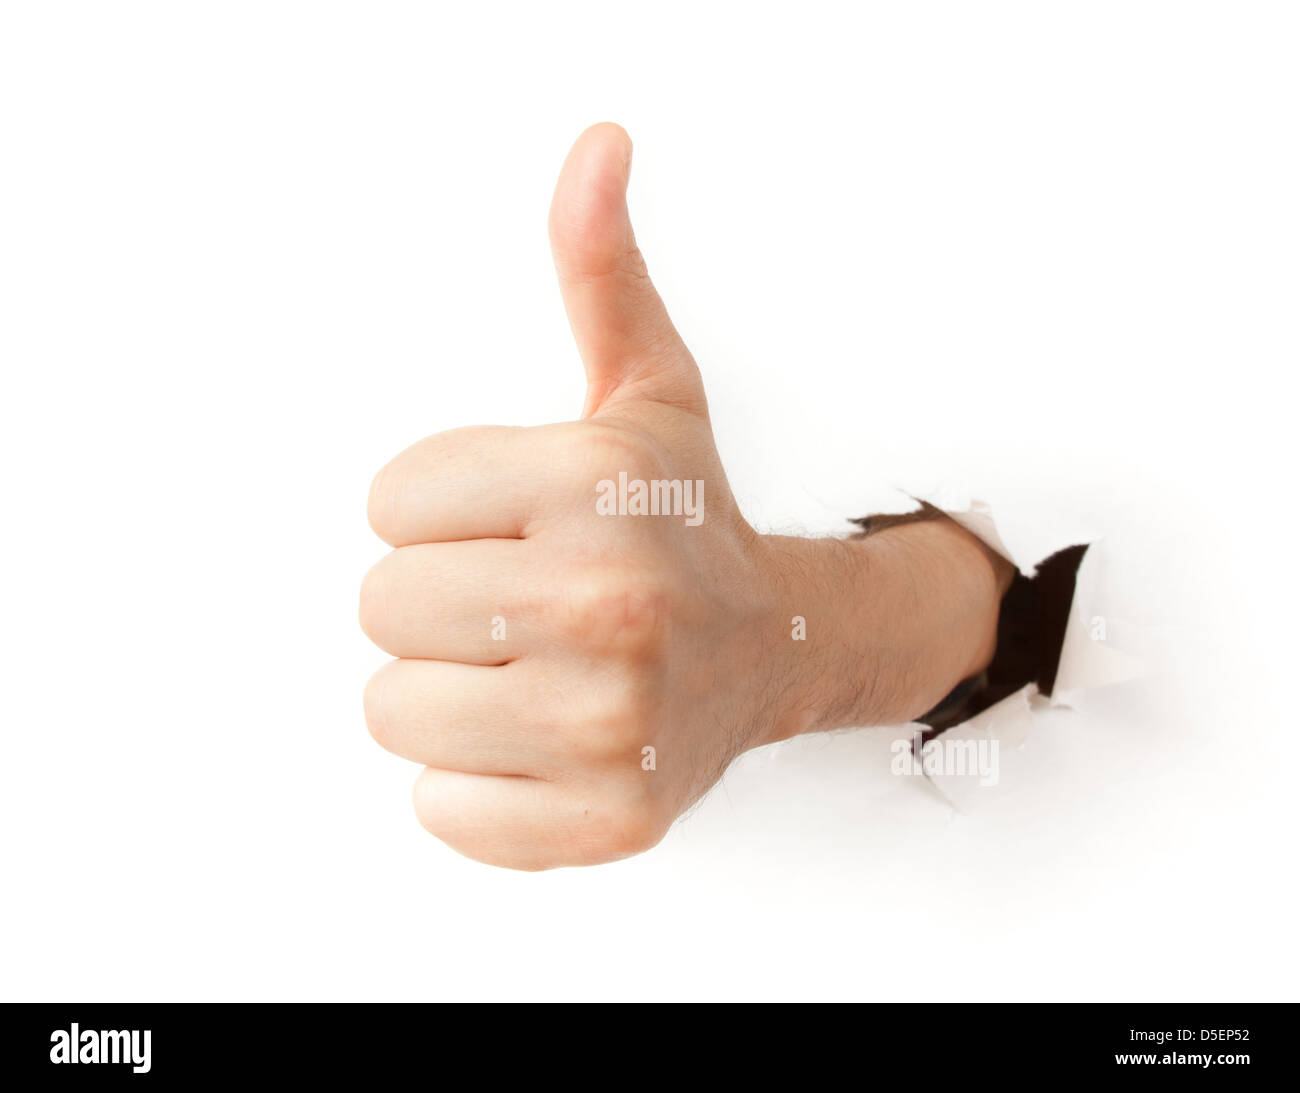 https://c8.alamy.com/comp/D5EP52/hand-with-thumb-up-through-a-hole-in-paper-D5EP52.jpg